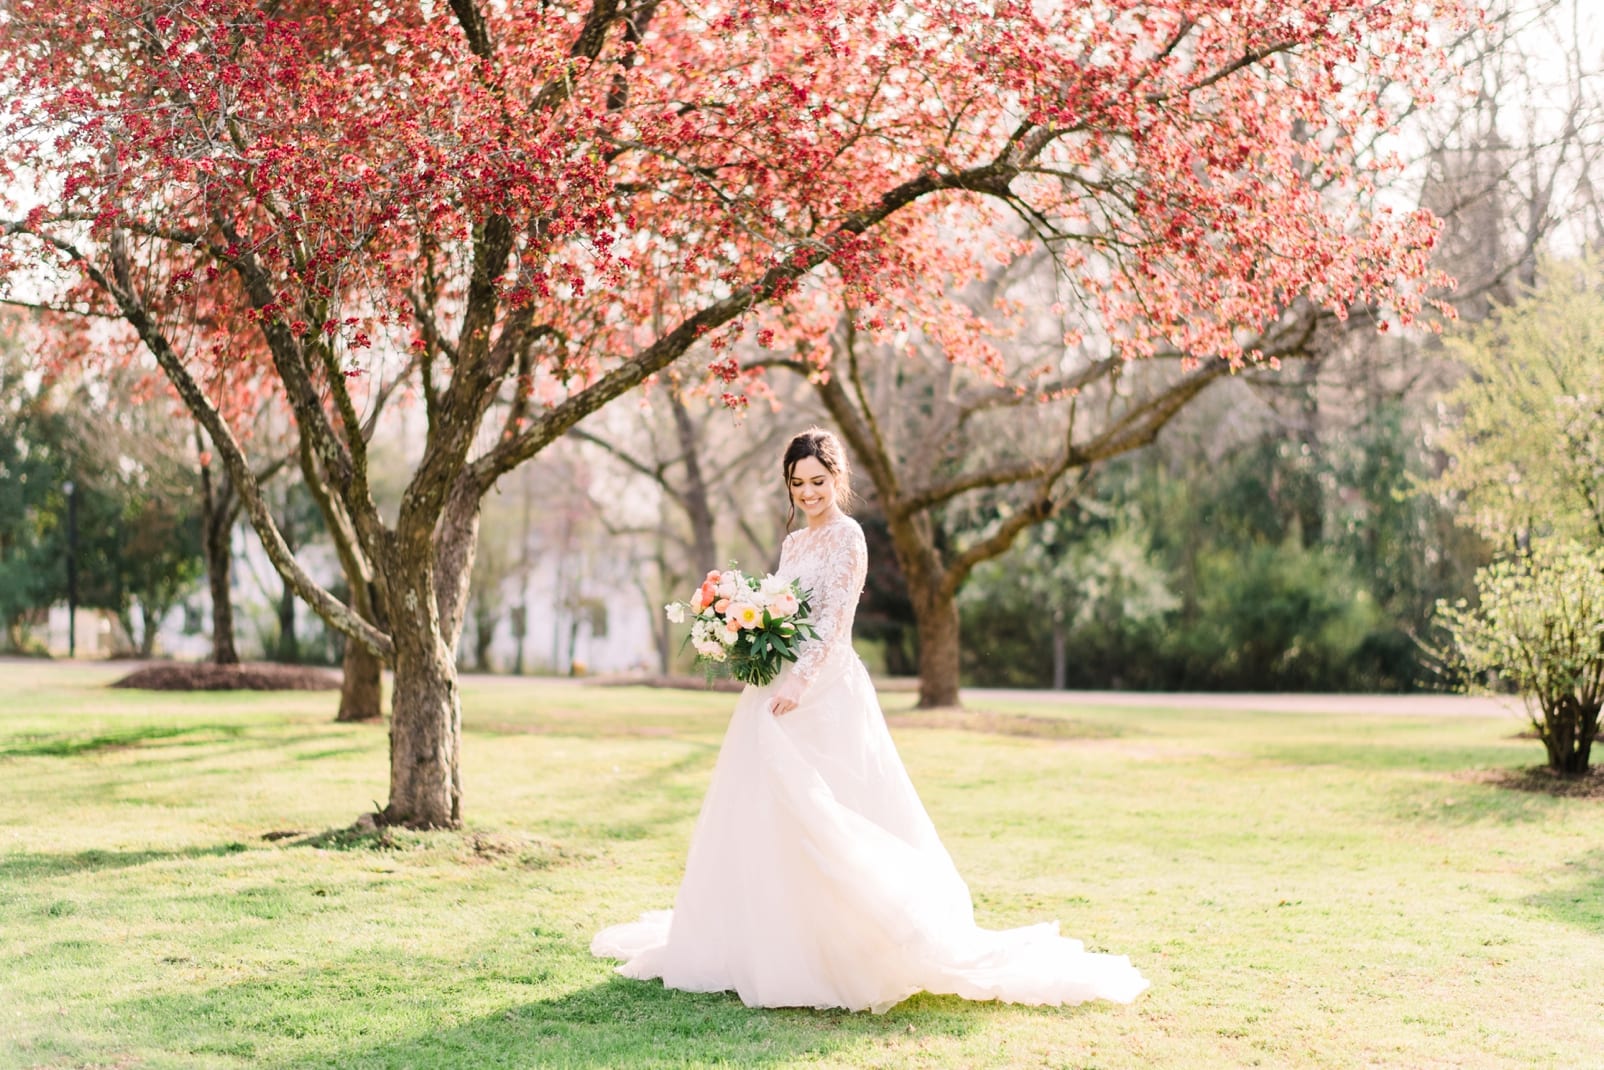 teighla norris hair and makeup on bride with tre bella wedding dress in sunlit field photo